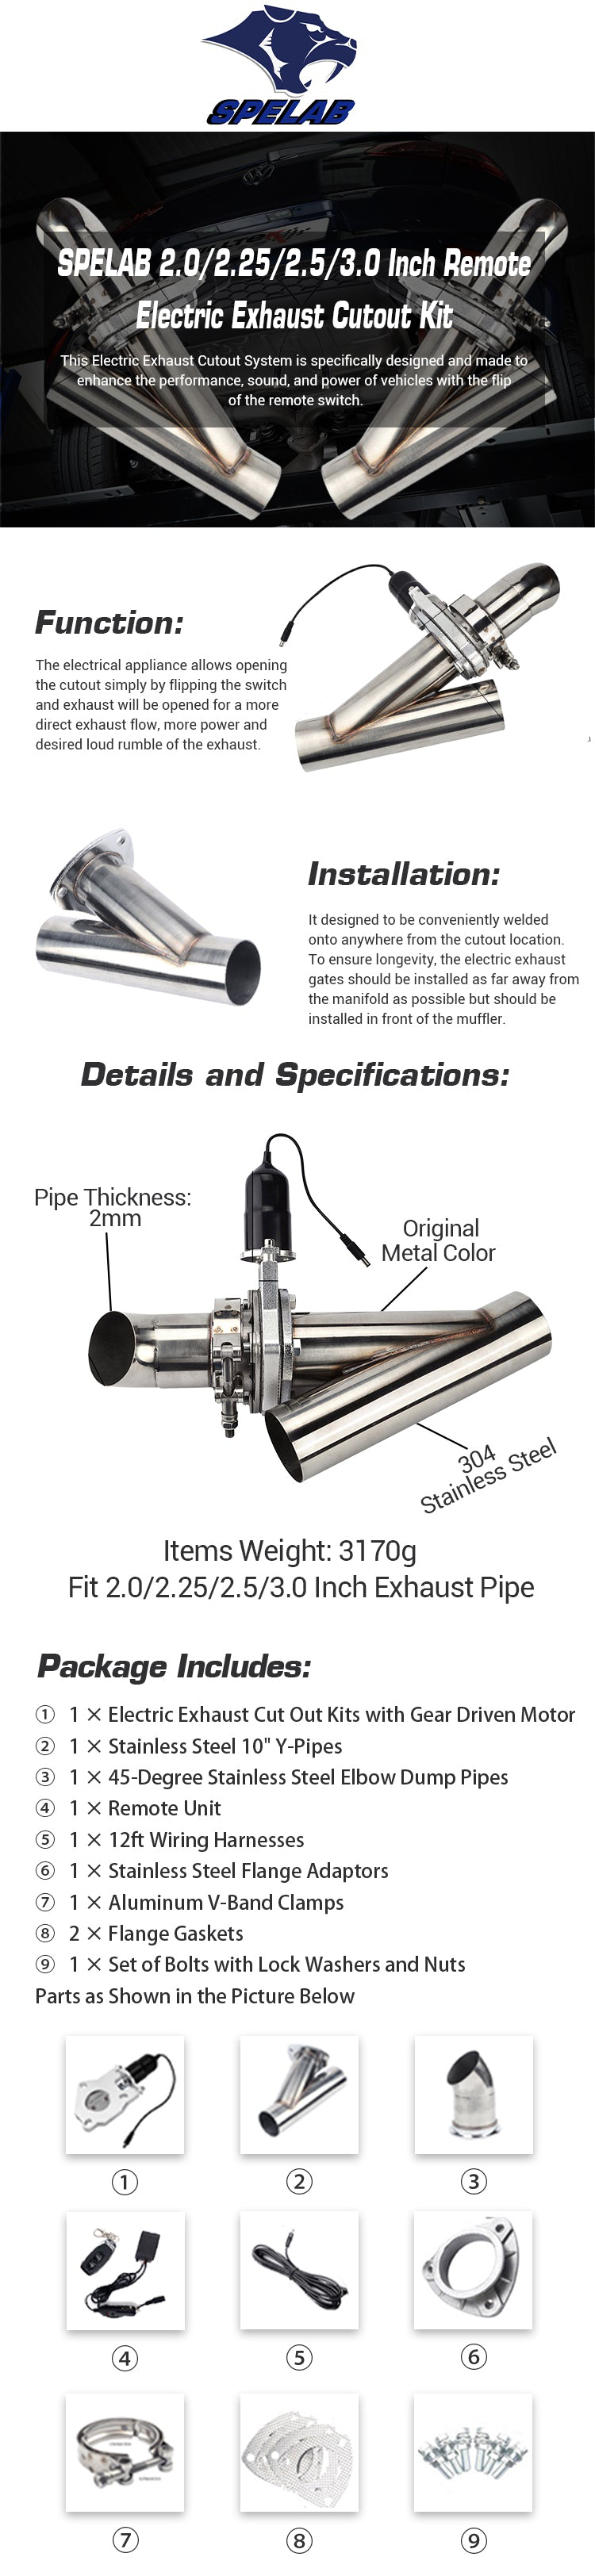 SPELAB 2.02.252.53.0 Inch Remote Electric Exhaust Cutout Kit listing